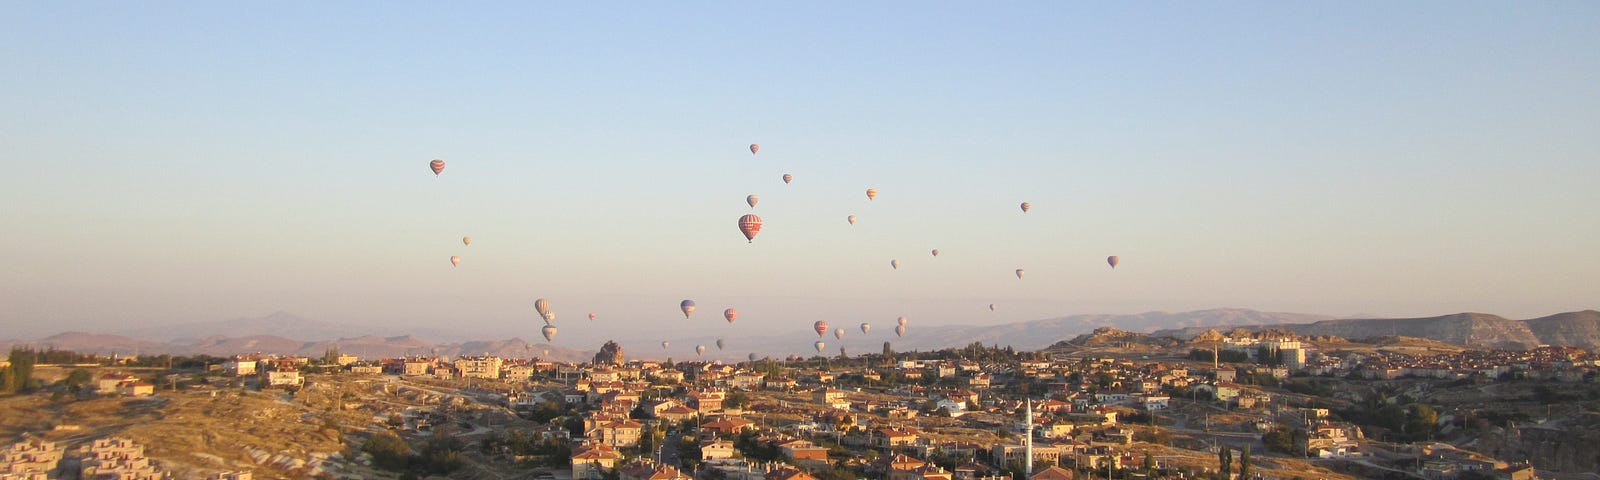 Many hot air balloons flying low over a city at sunrise